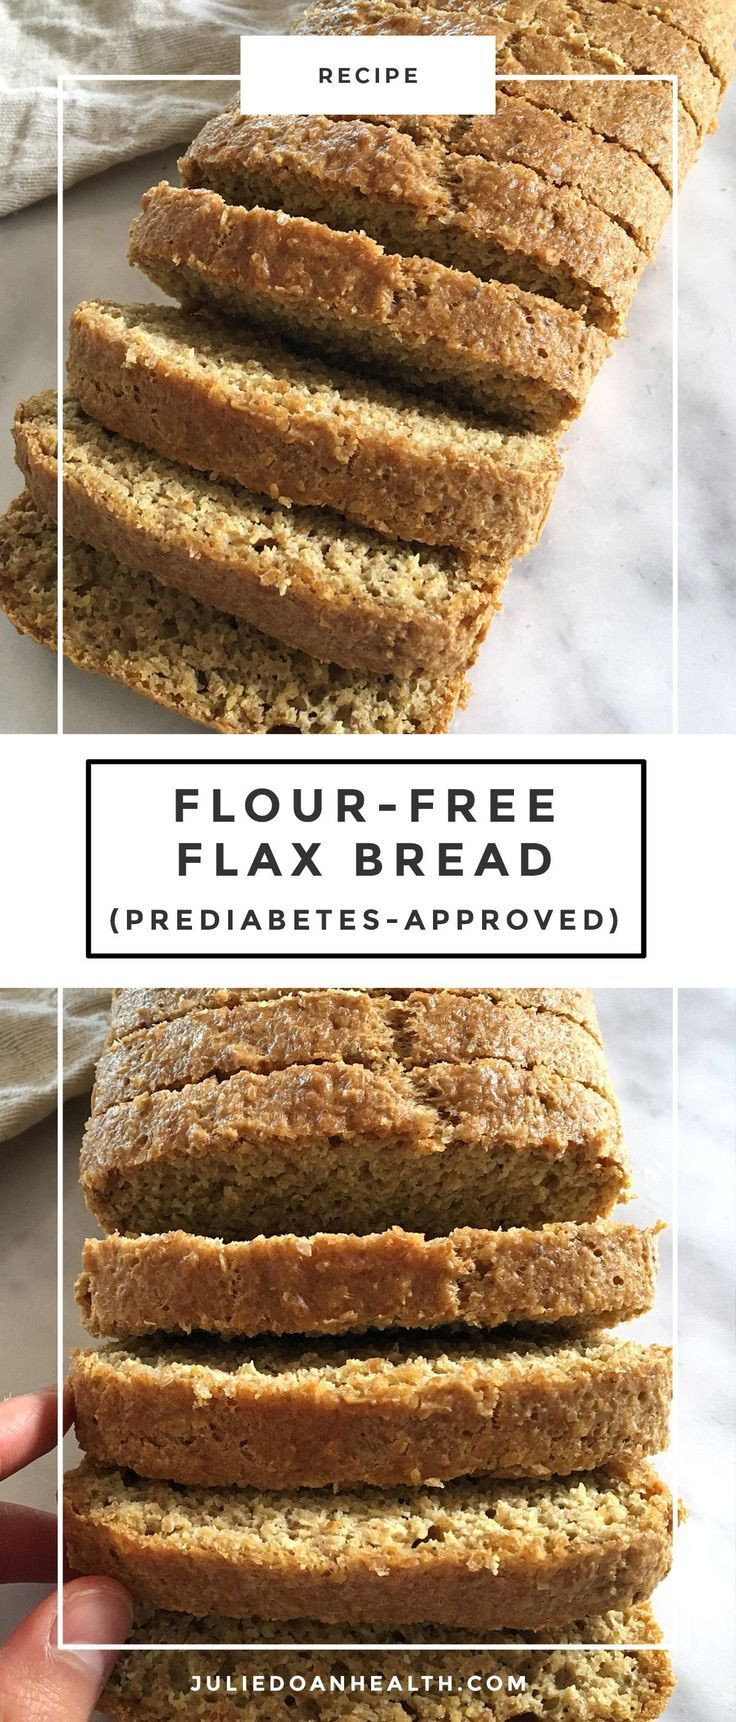 Low Carb Flax Seed Recipes
 A delicious low carb and flour free flax seed bread full